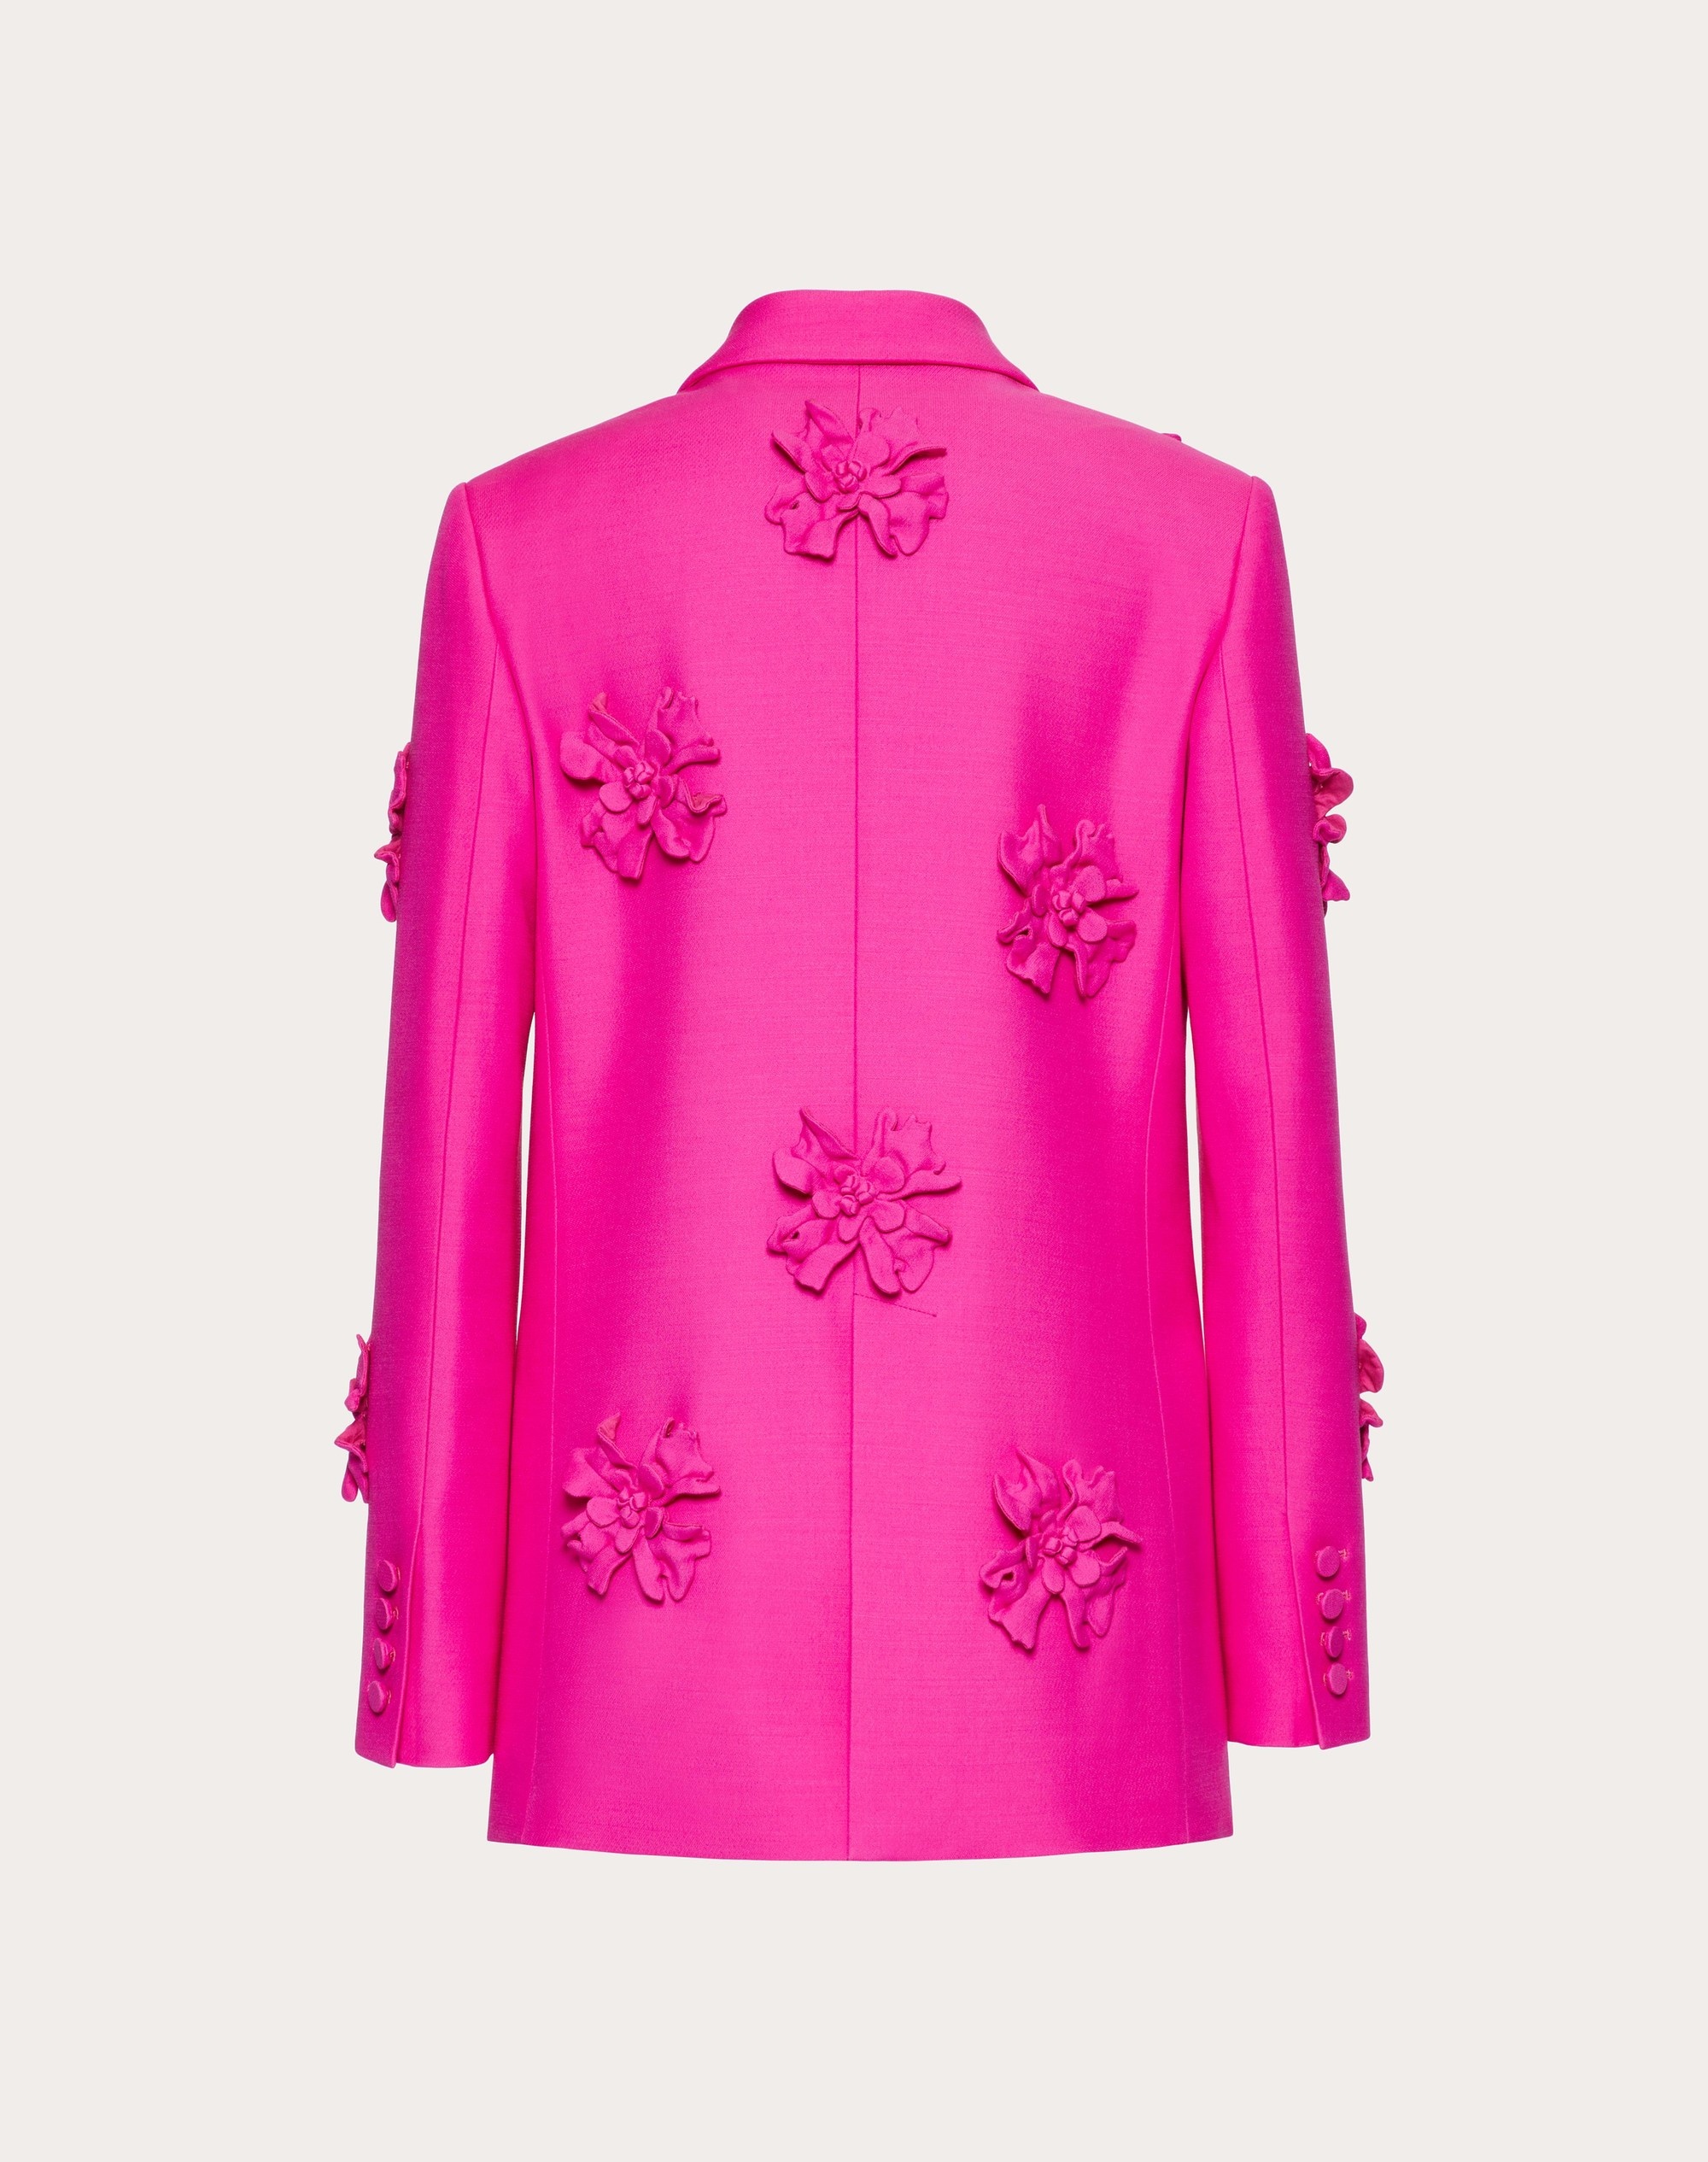 CREPE COUTURE BLAZER WITH FLORAL EMBROIDERY - 3